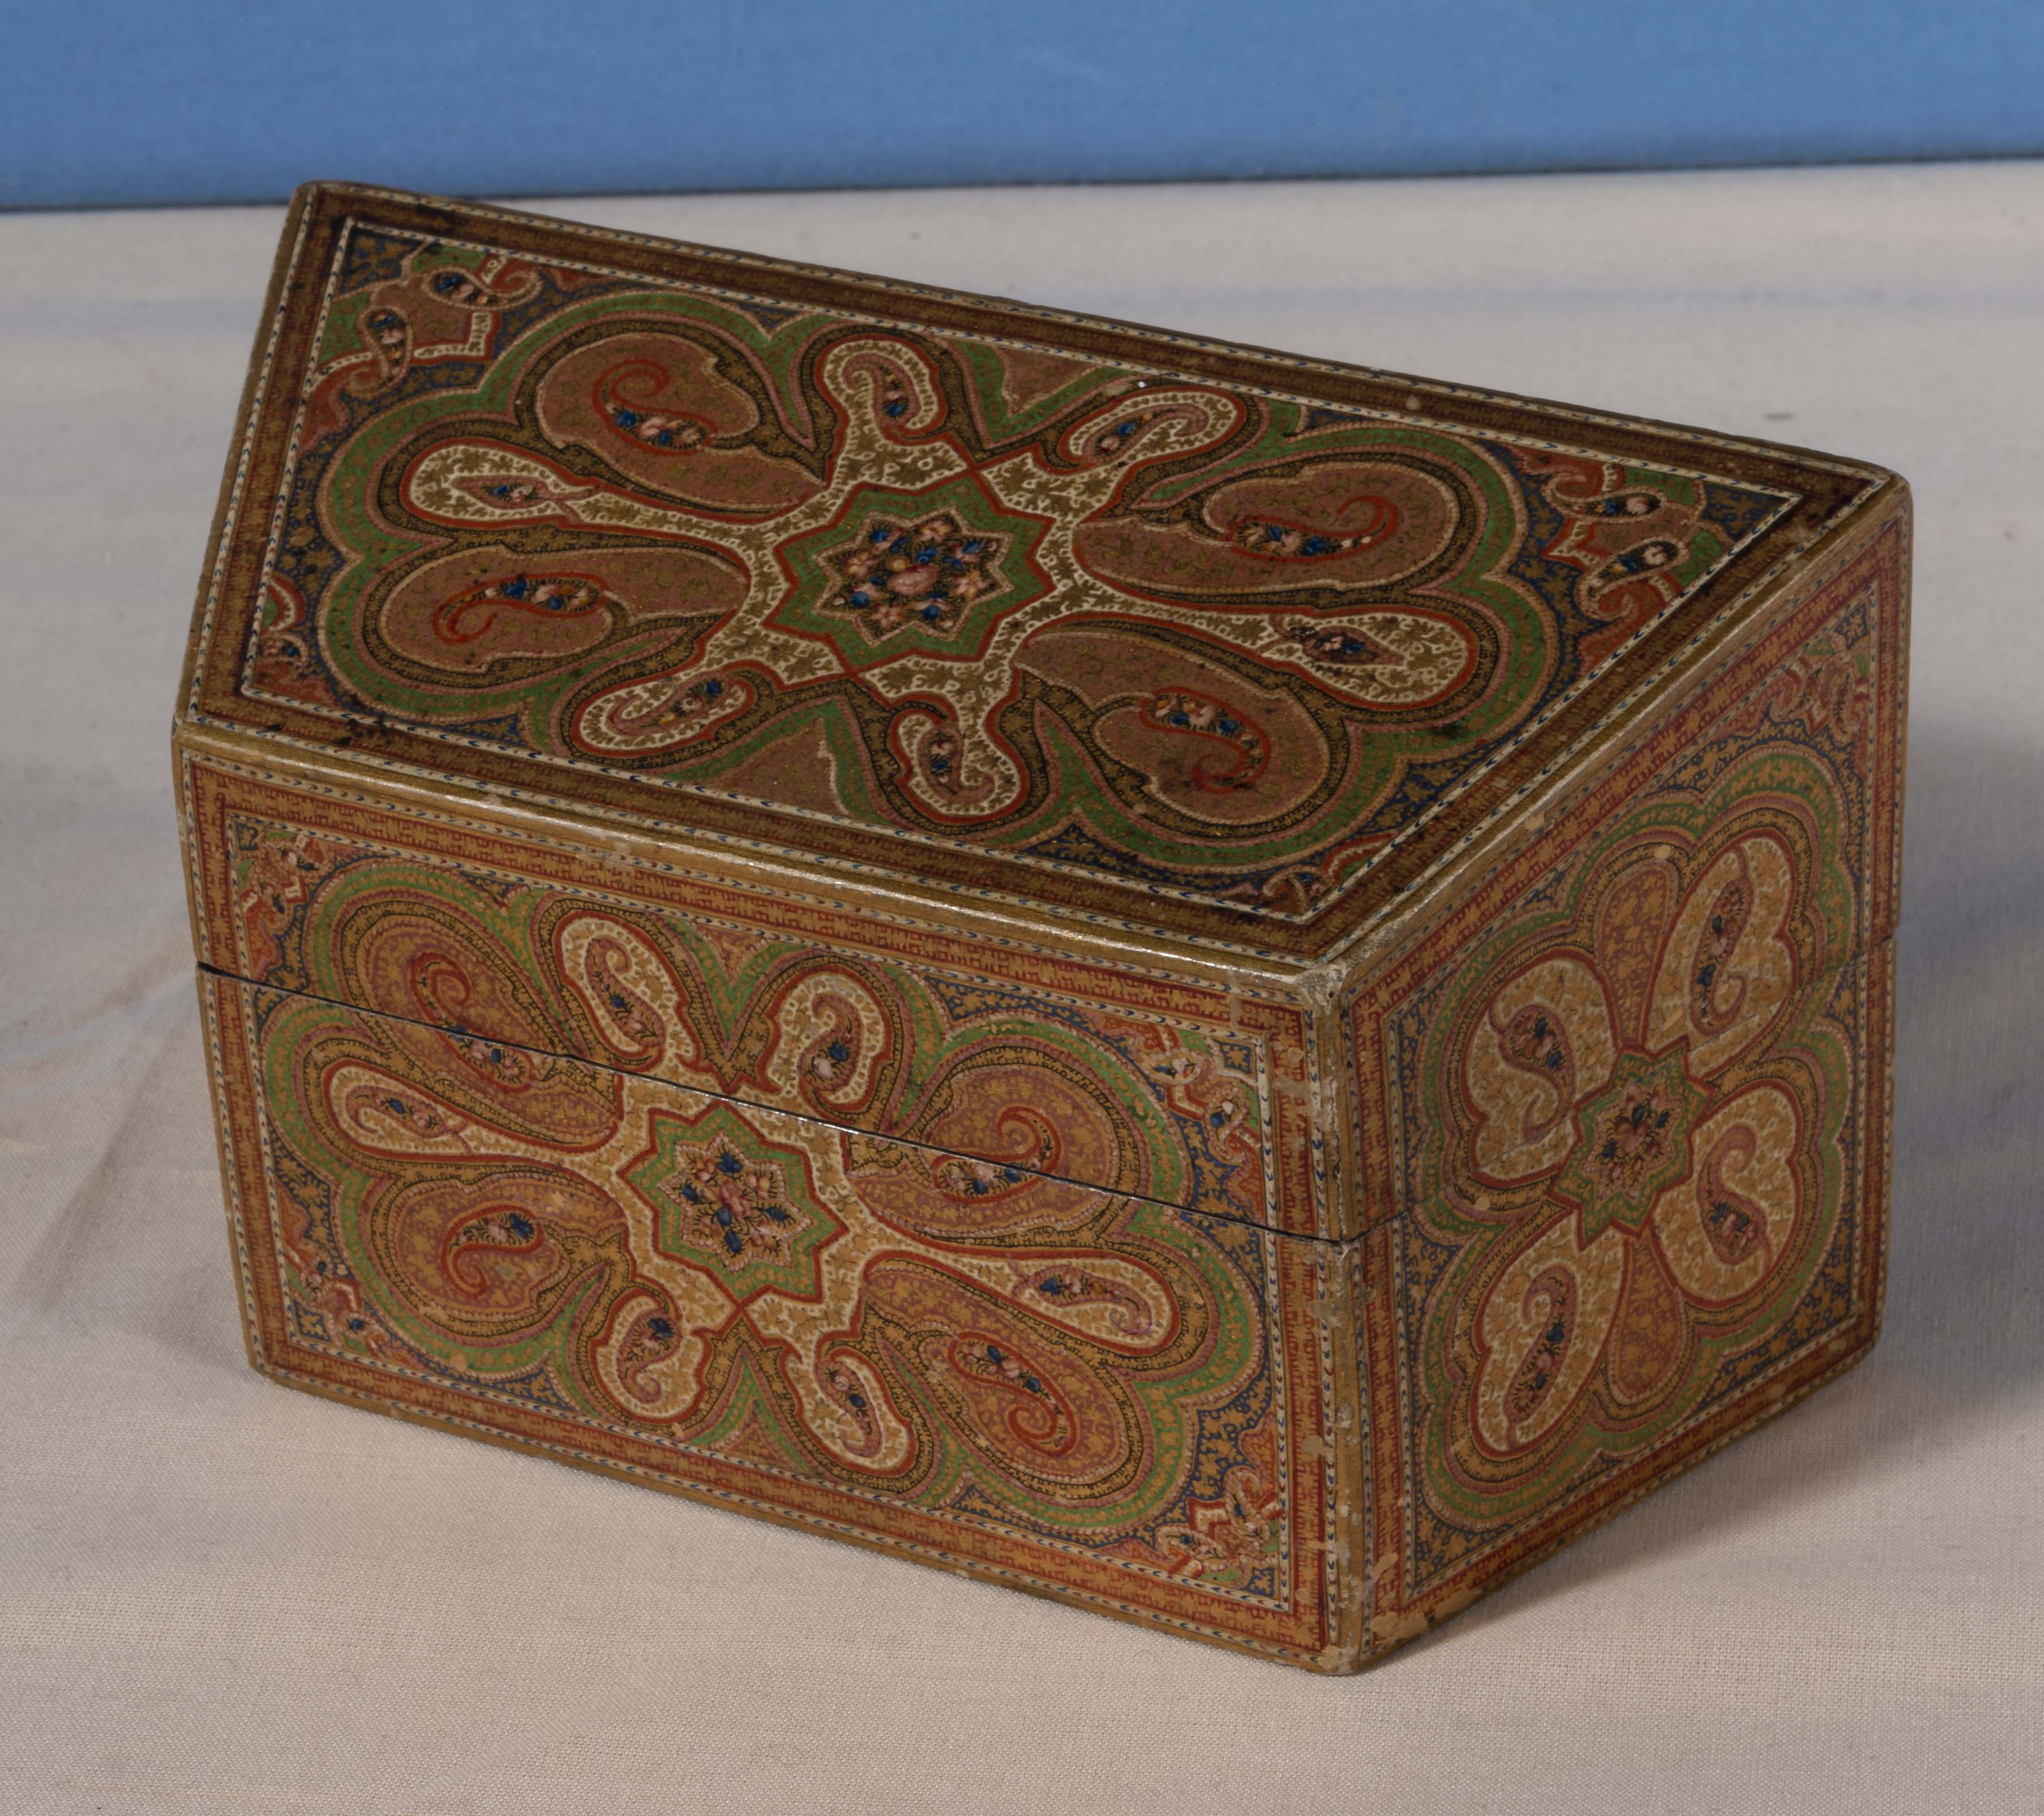 An antique Kashmir lacquered and decorated lidded box